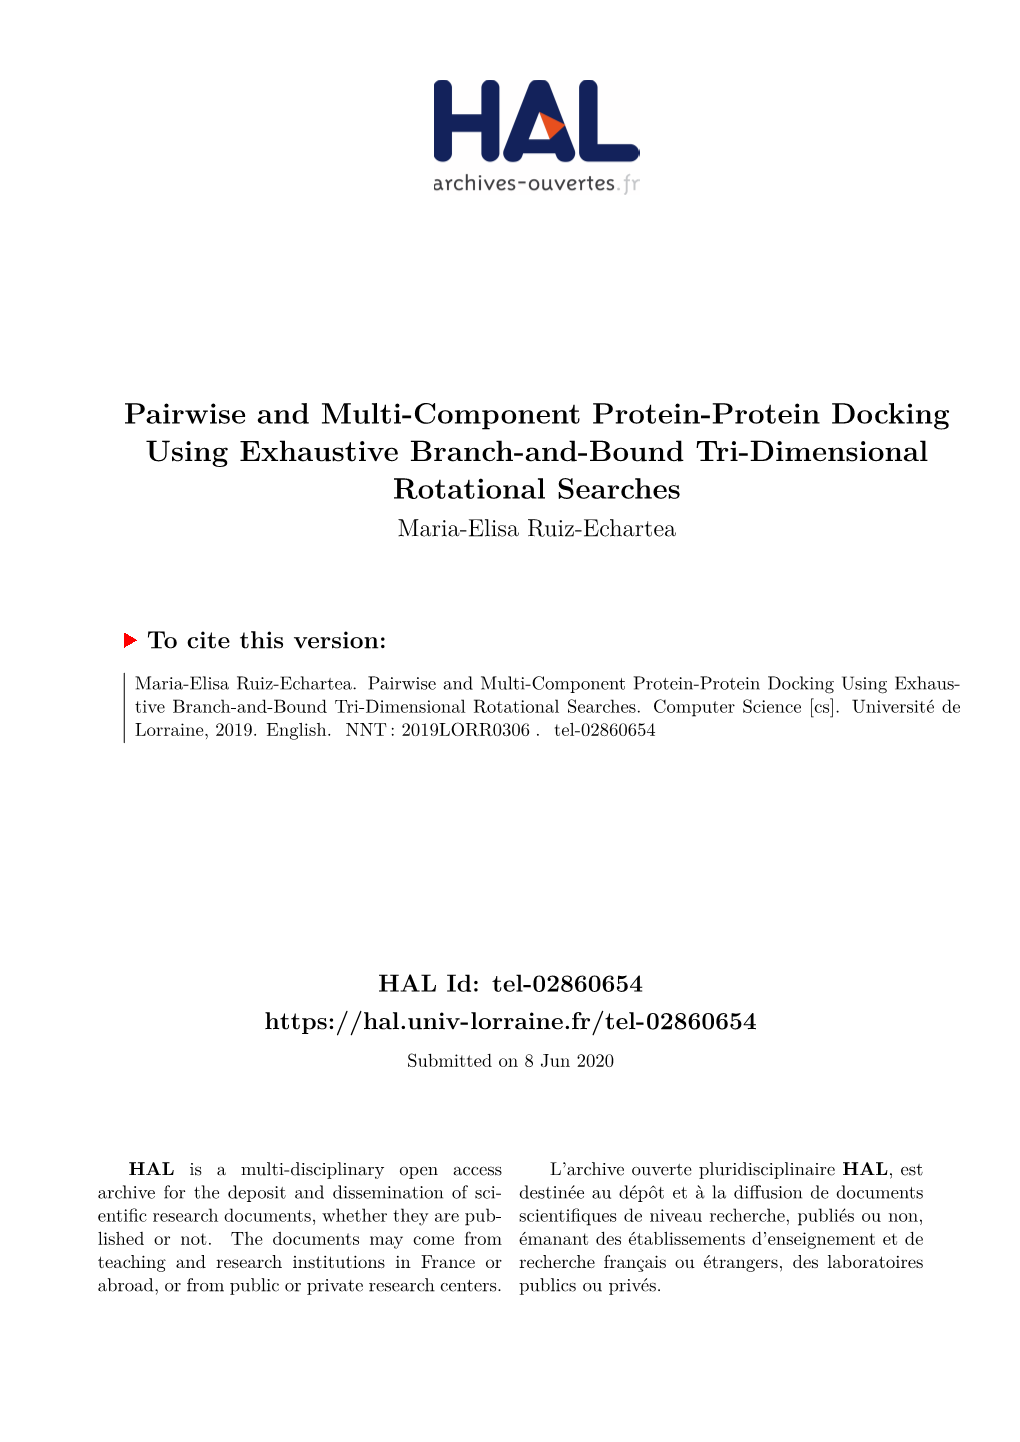 Pairwise and Multi-Component Protein-Protein Docking Using Exhaustive Branch-And-Bound Tri-Dimensional Rotational Searches Maria-Elisa Ruiz-Echartea